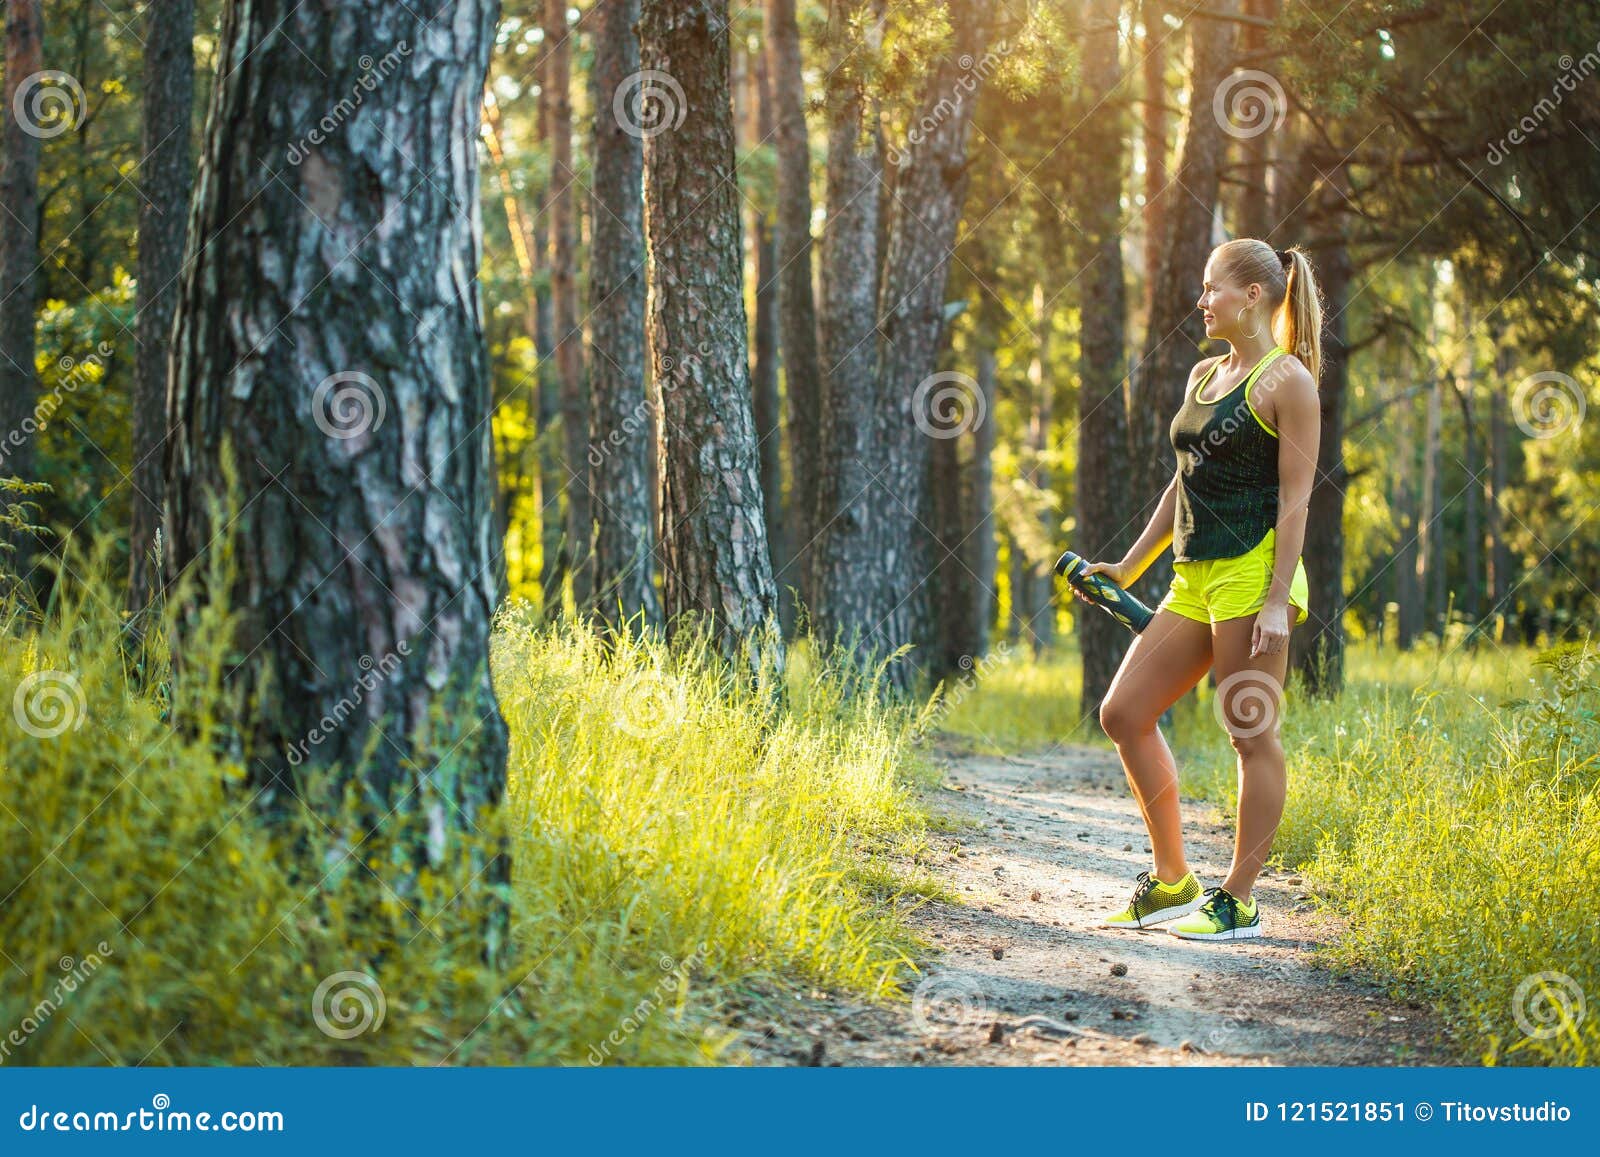 Beautiful Blonde Athletic Woman On A Run In The Forest Stock Image